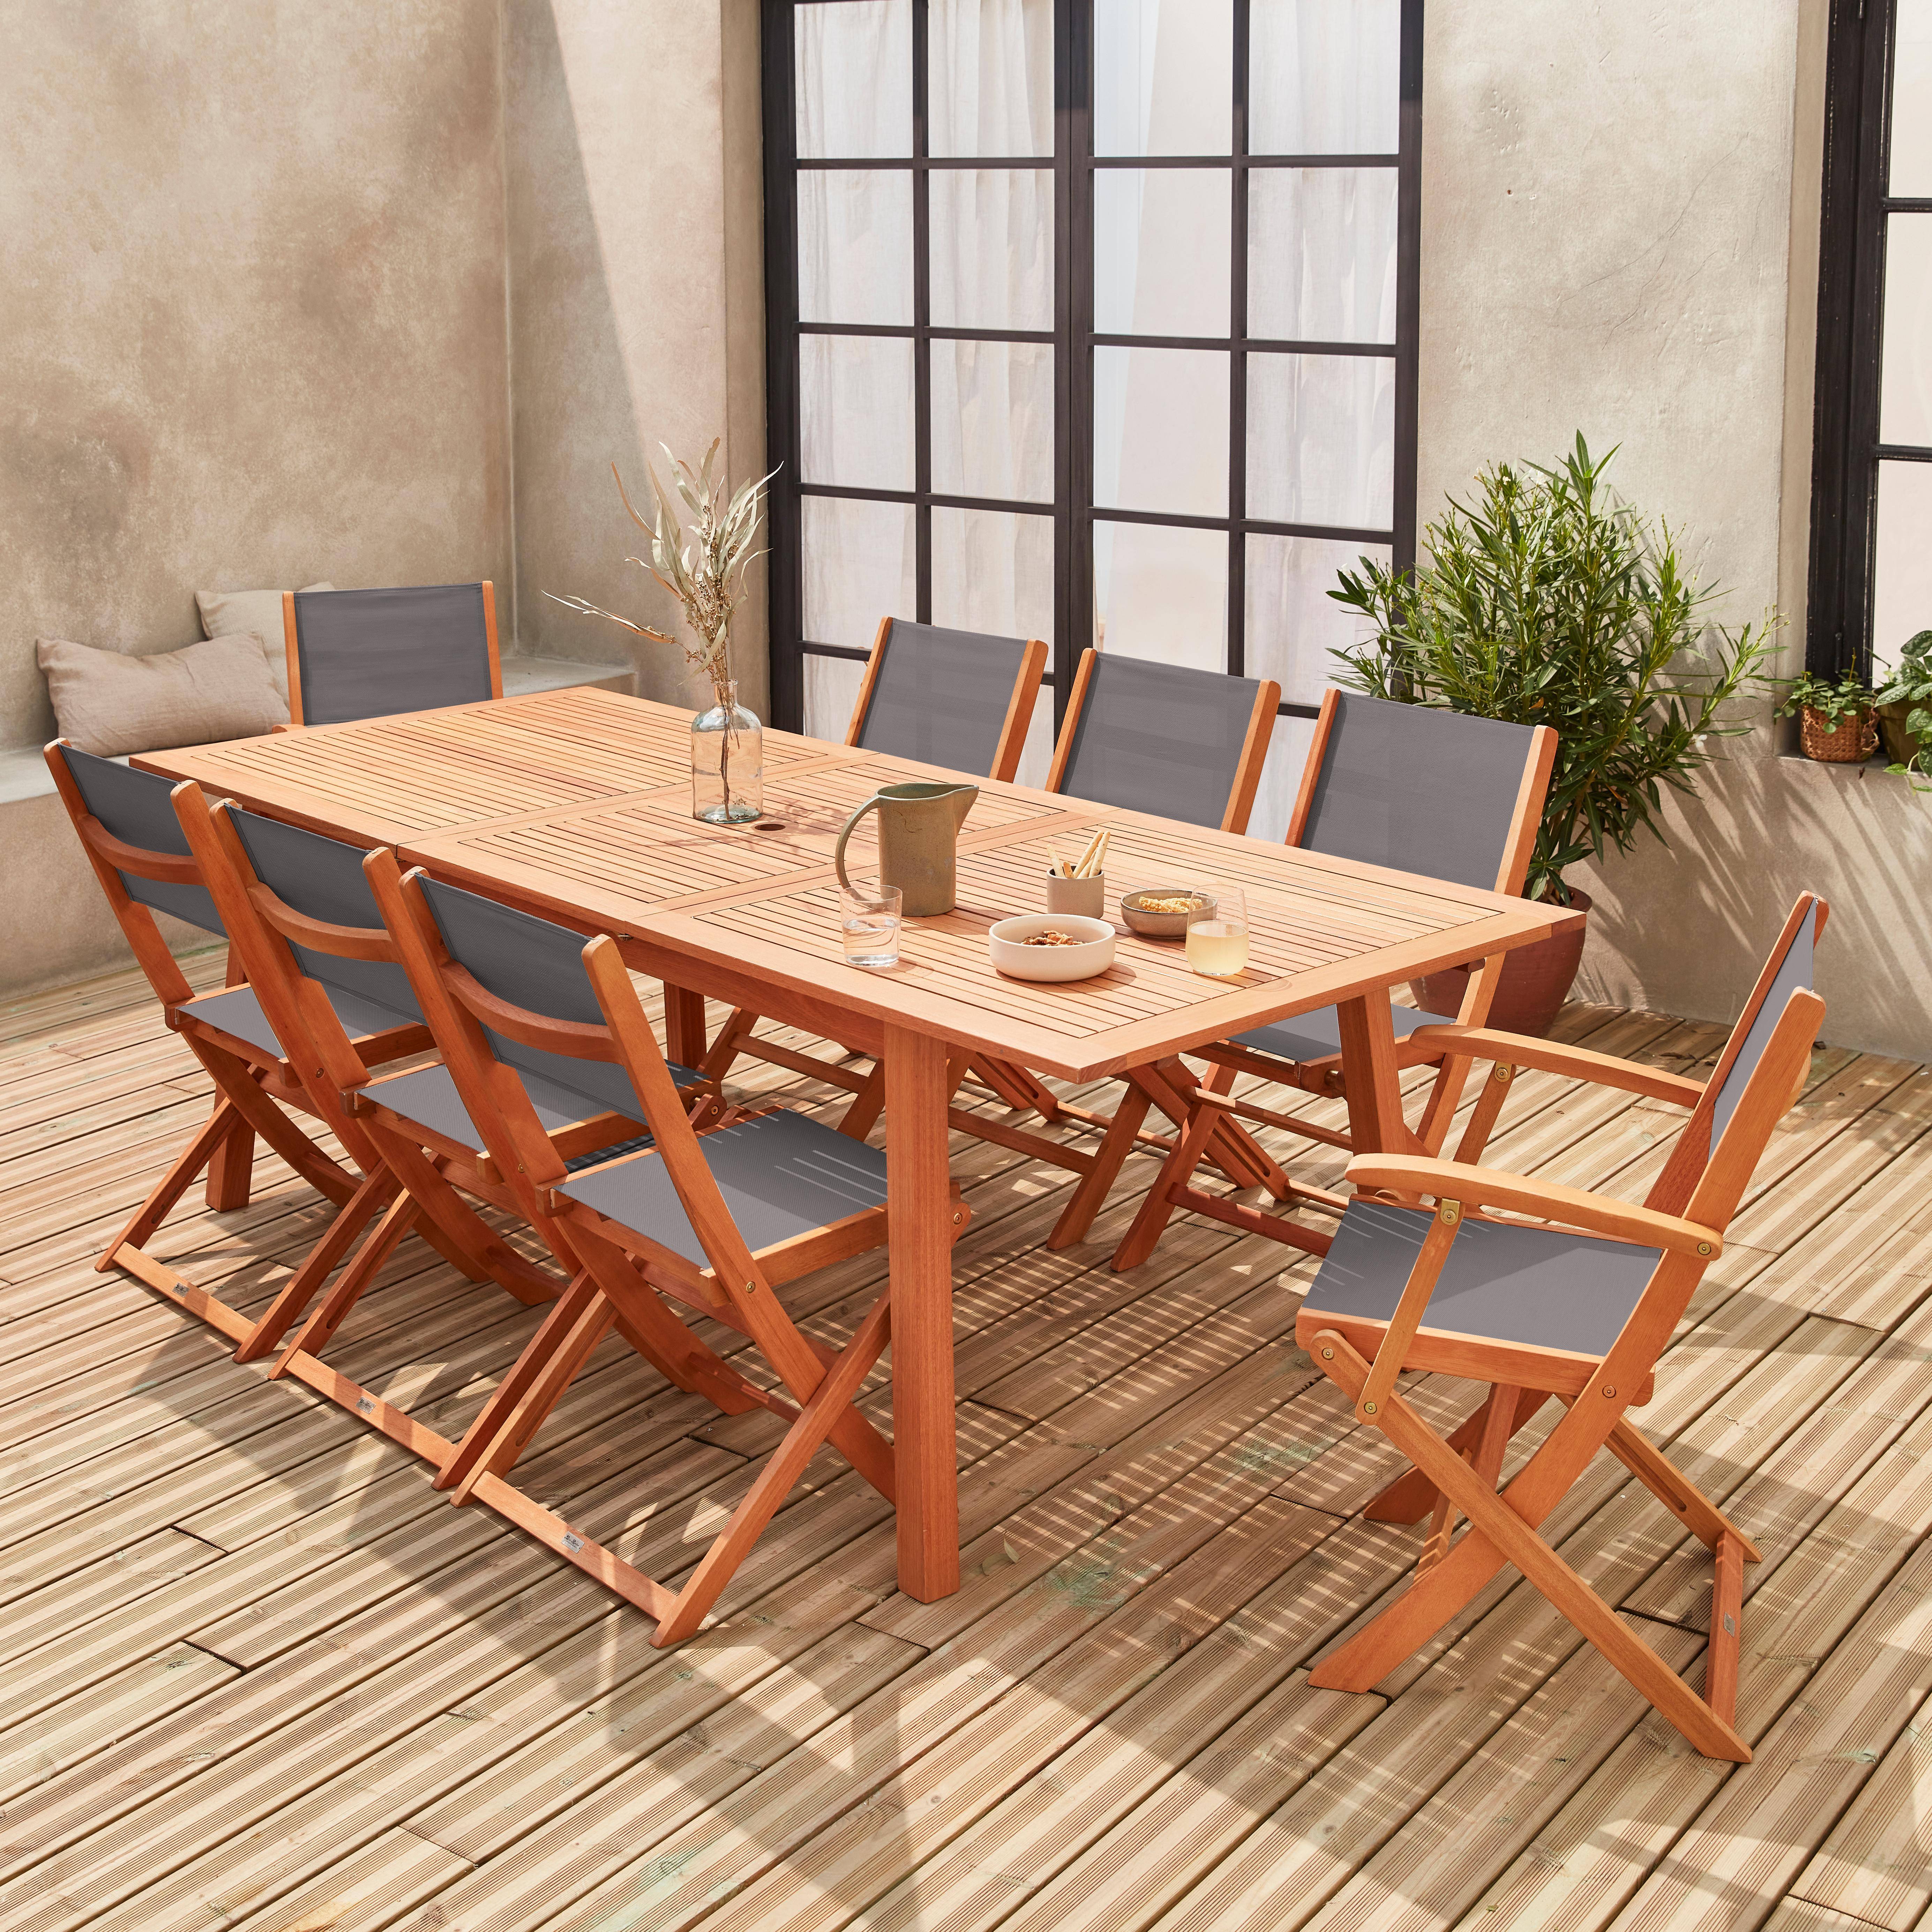 8-seater garden dining set, extendable 180-240cm FSC-eucalyptus wooden table, 6 chairs and 2 armchairs - Almeria 8 - Anthracite textilene seats Photo1